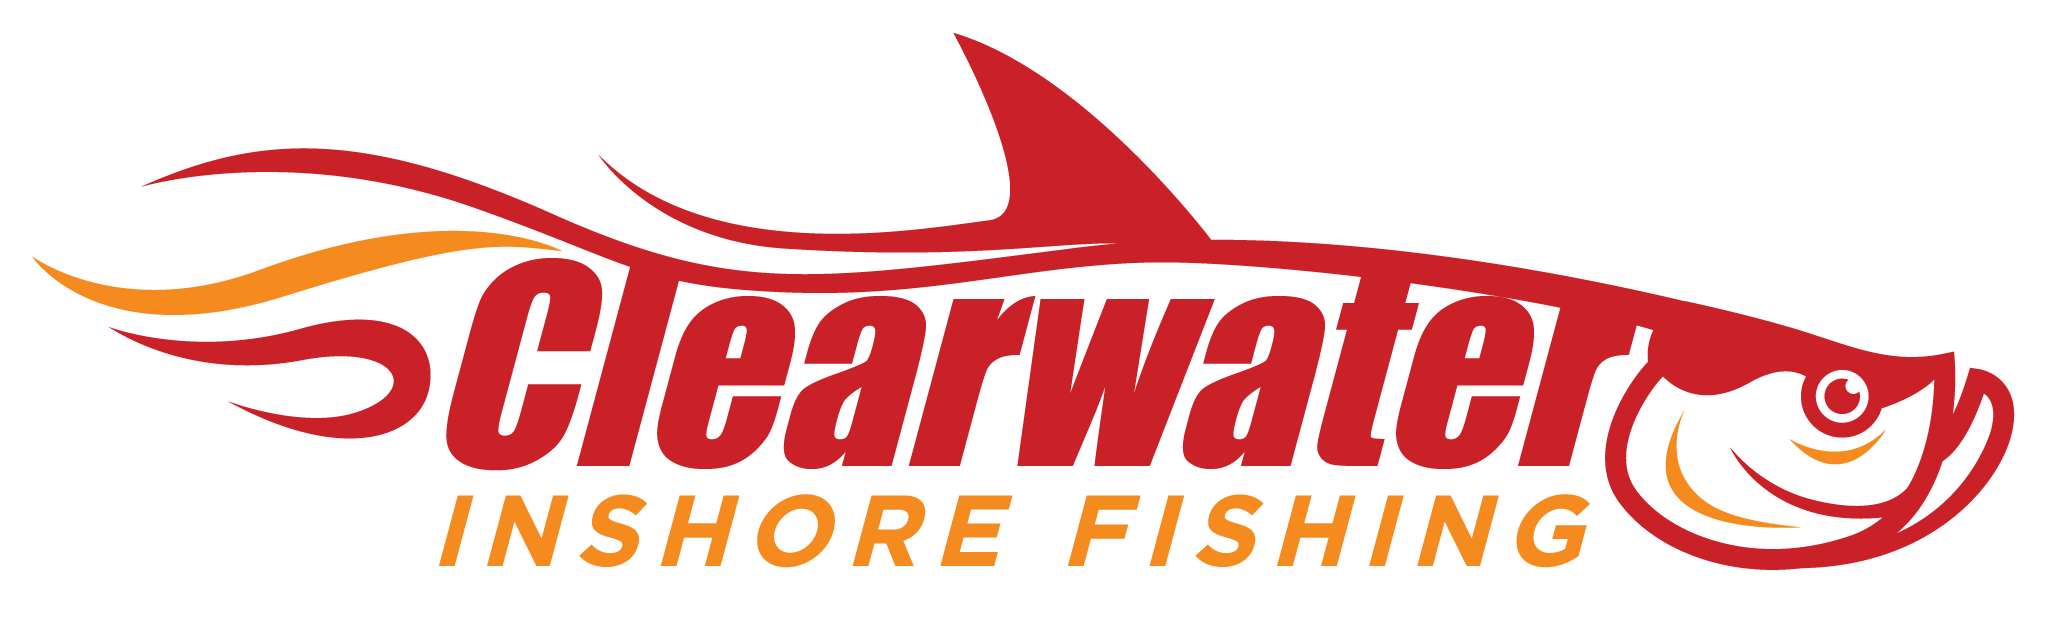 Clearwater Inshore Fishing Report for November